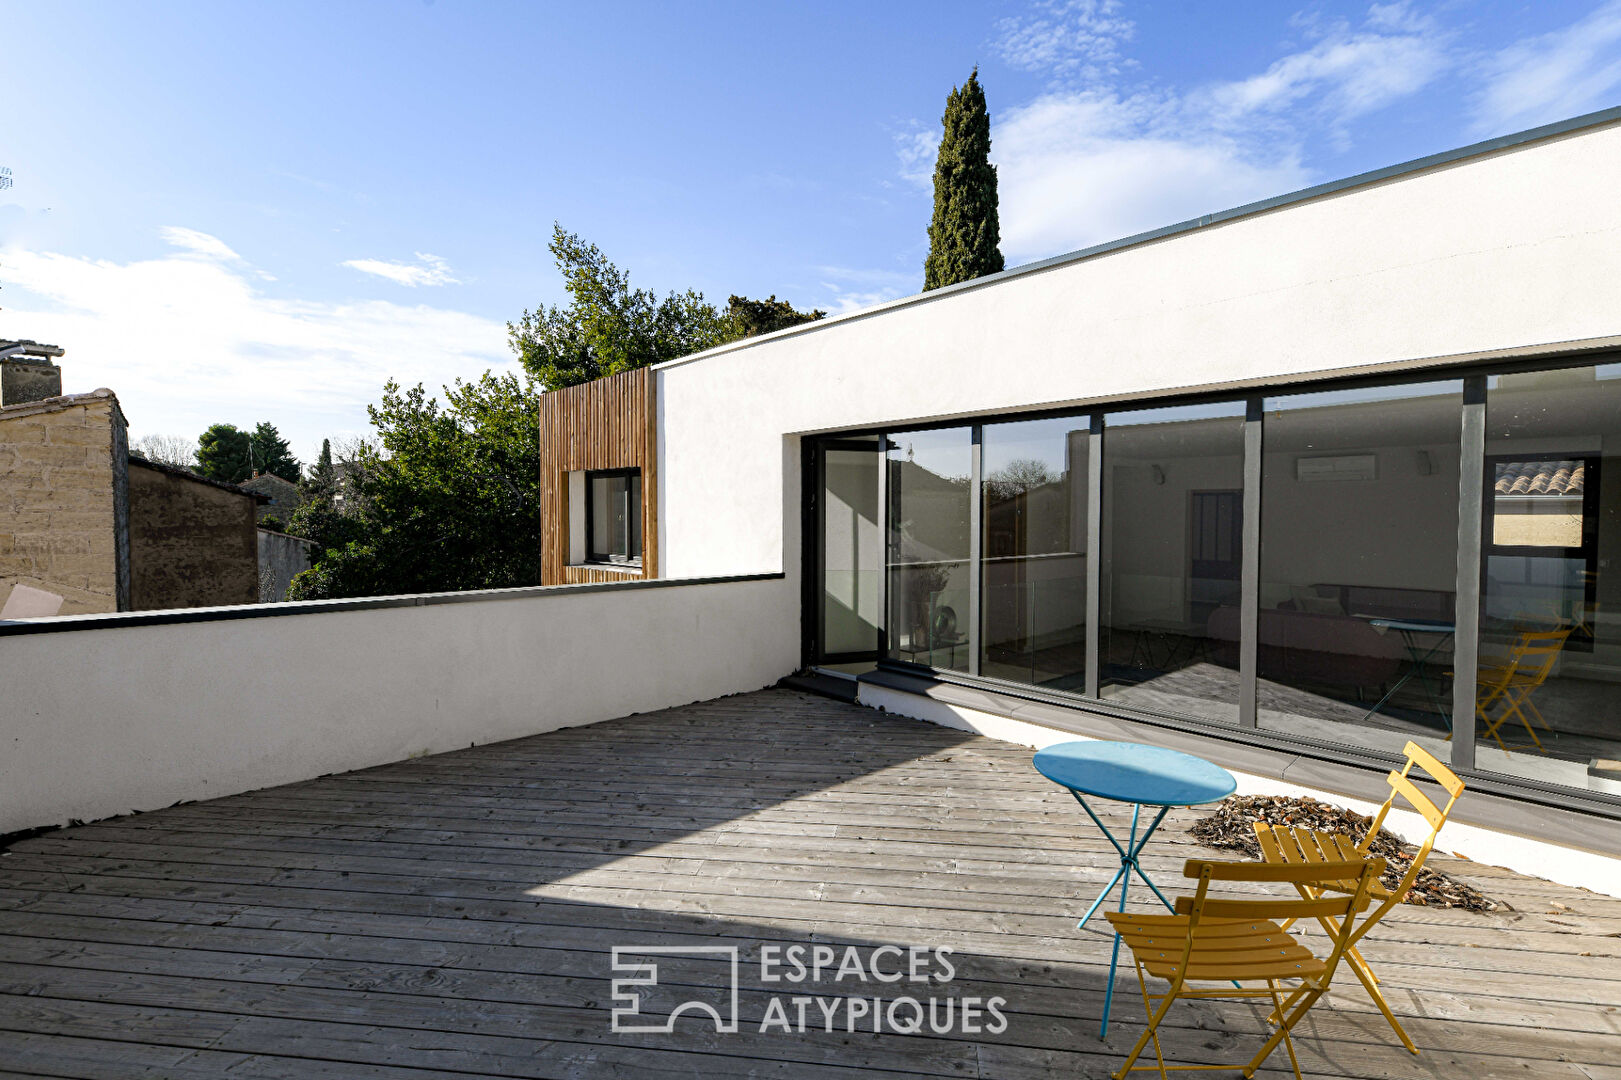 Sleek contemporary in the heart of Uzes